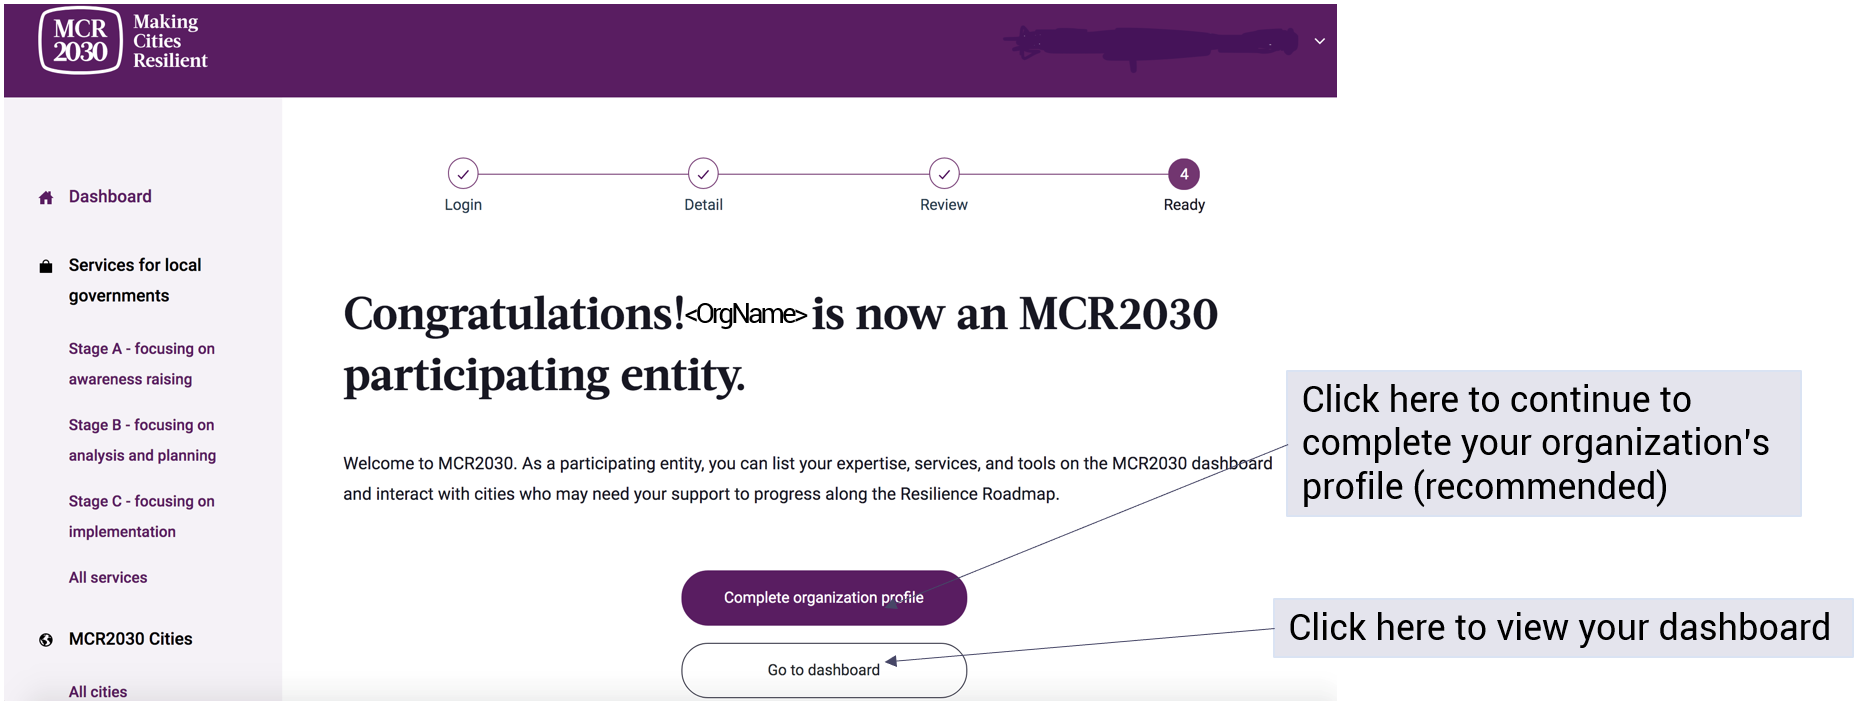 How to create MCR2030 dashboard account - complete